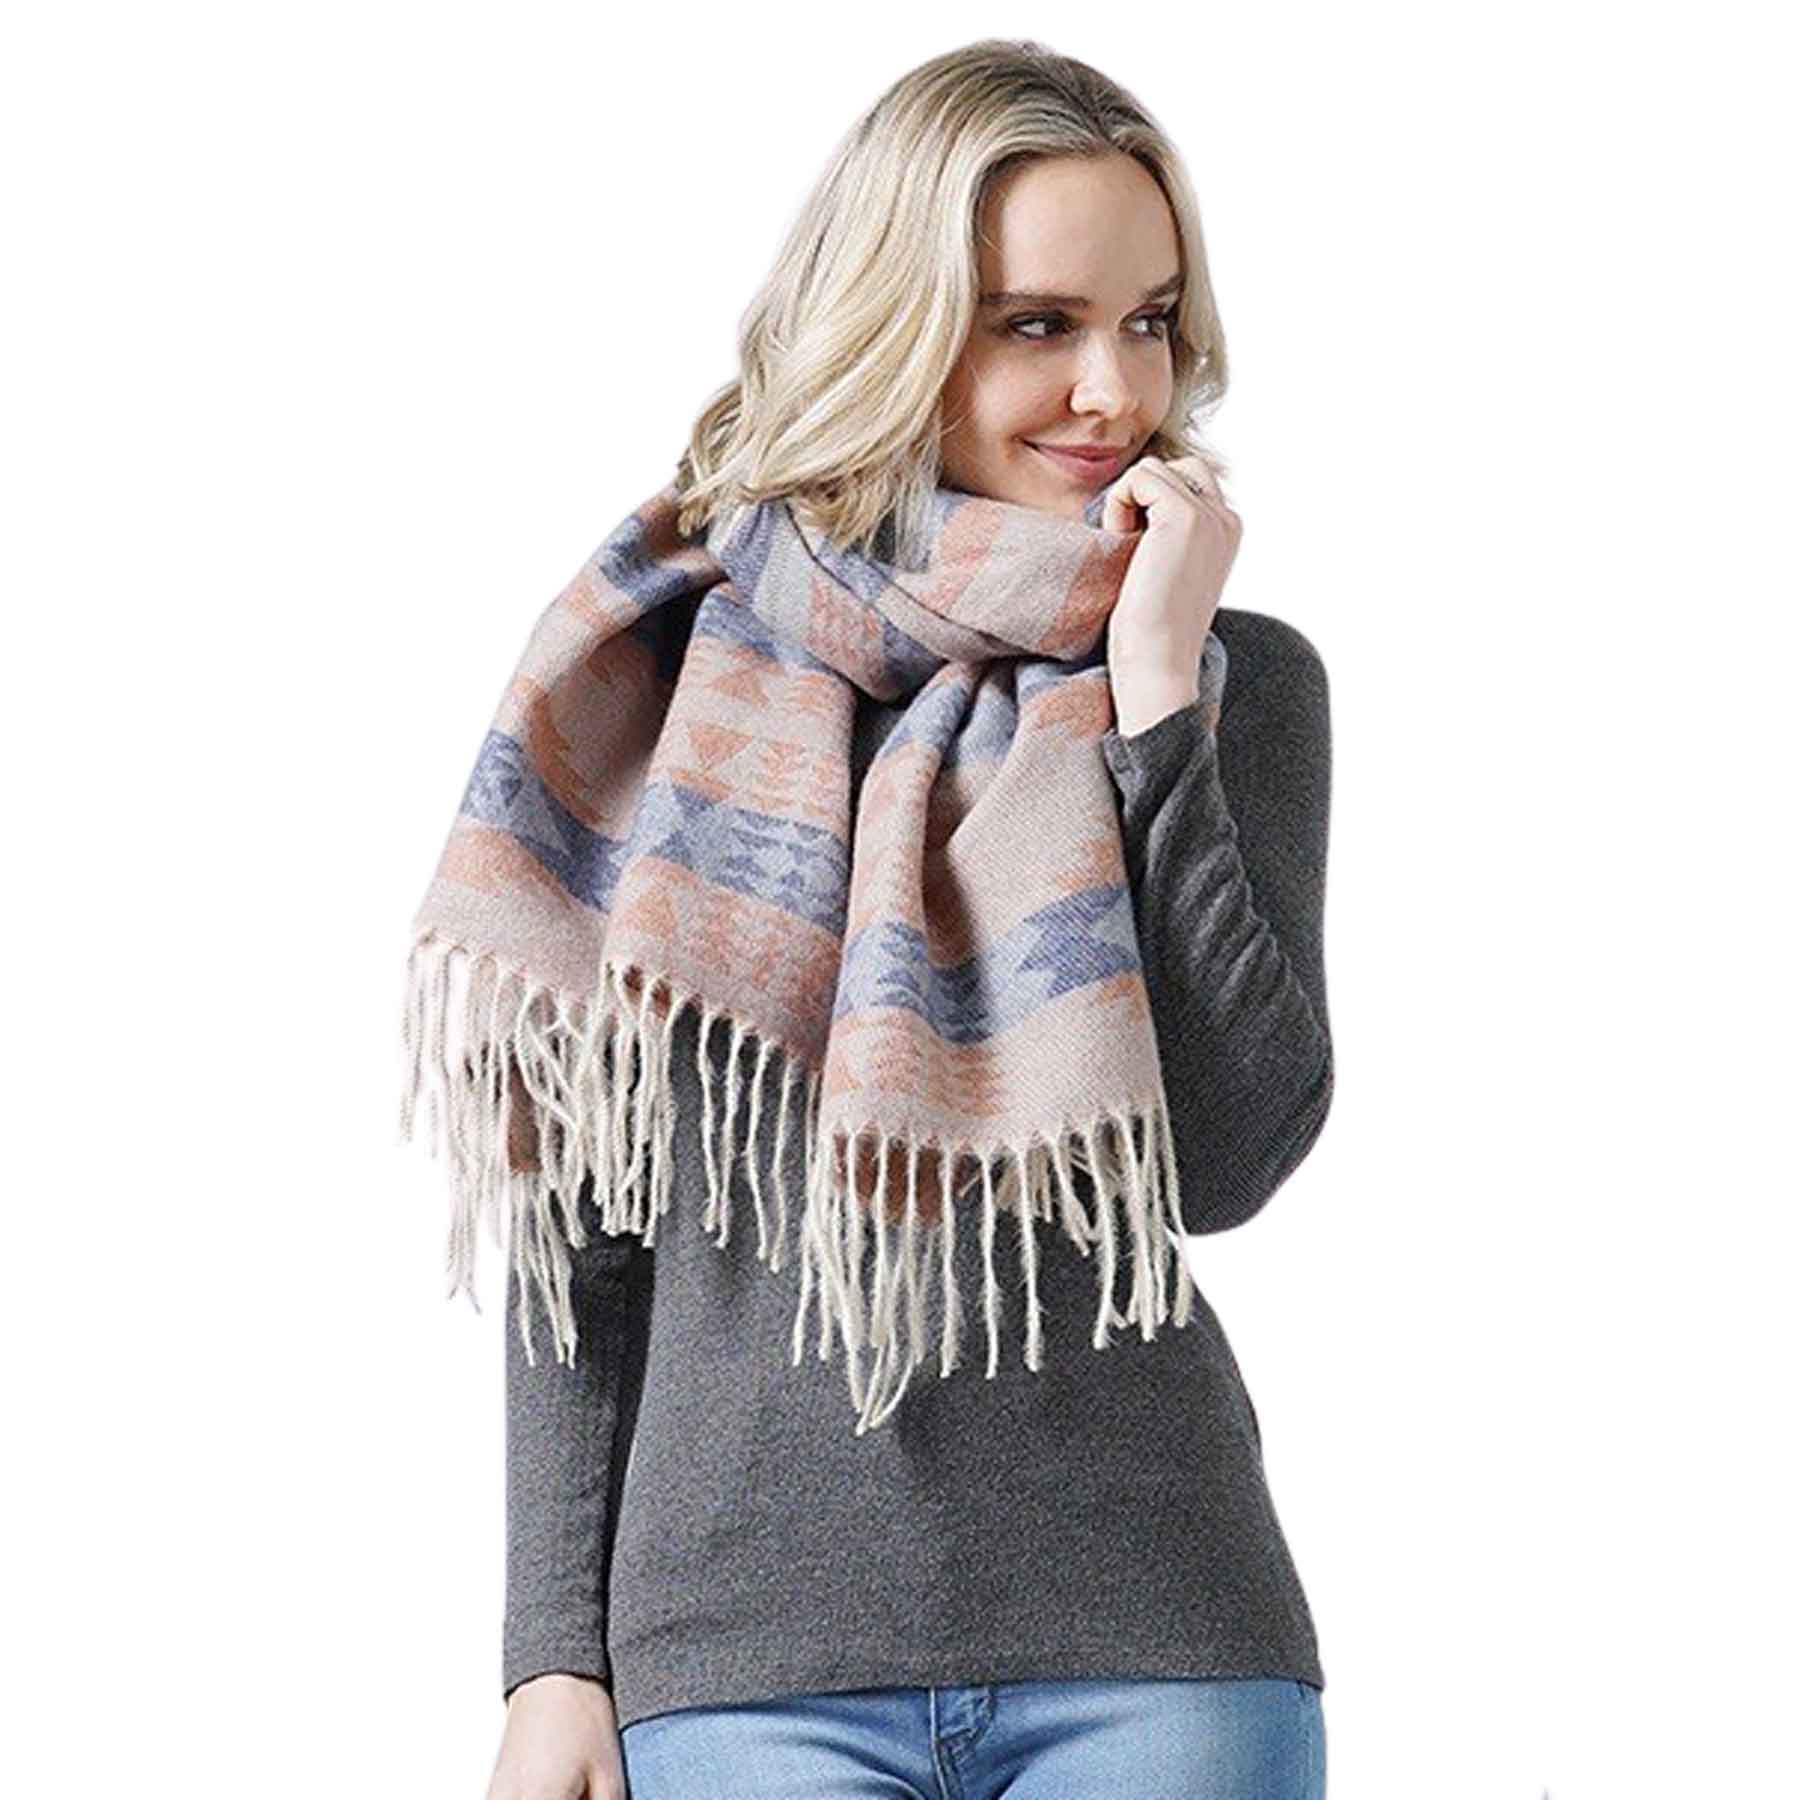 10293 - Navy Tones<br>
Western Pattern Woven Scarf